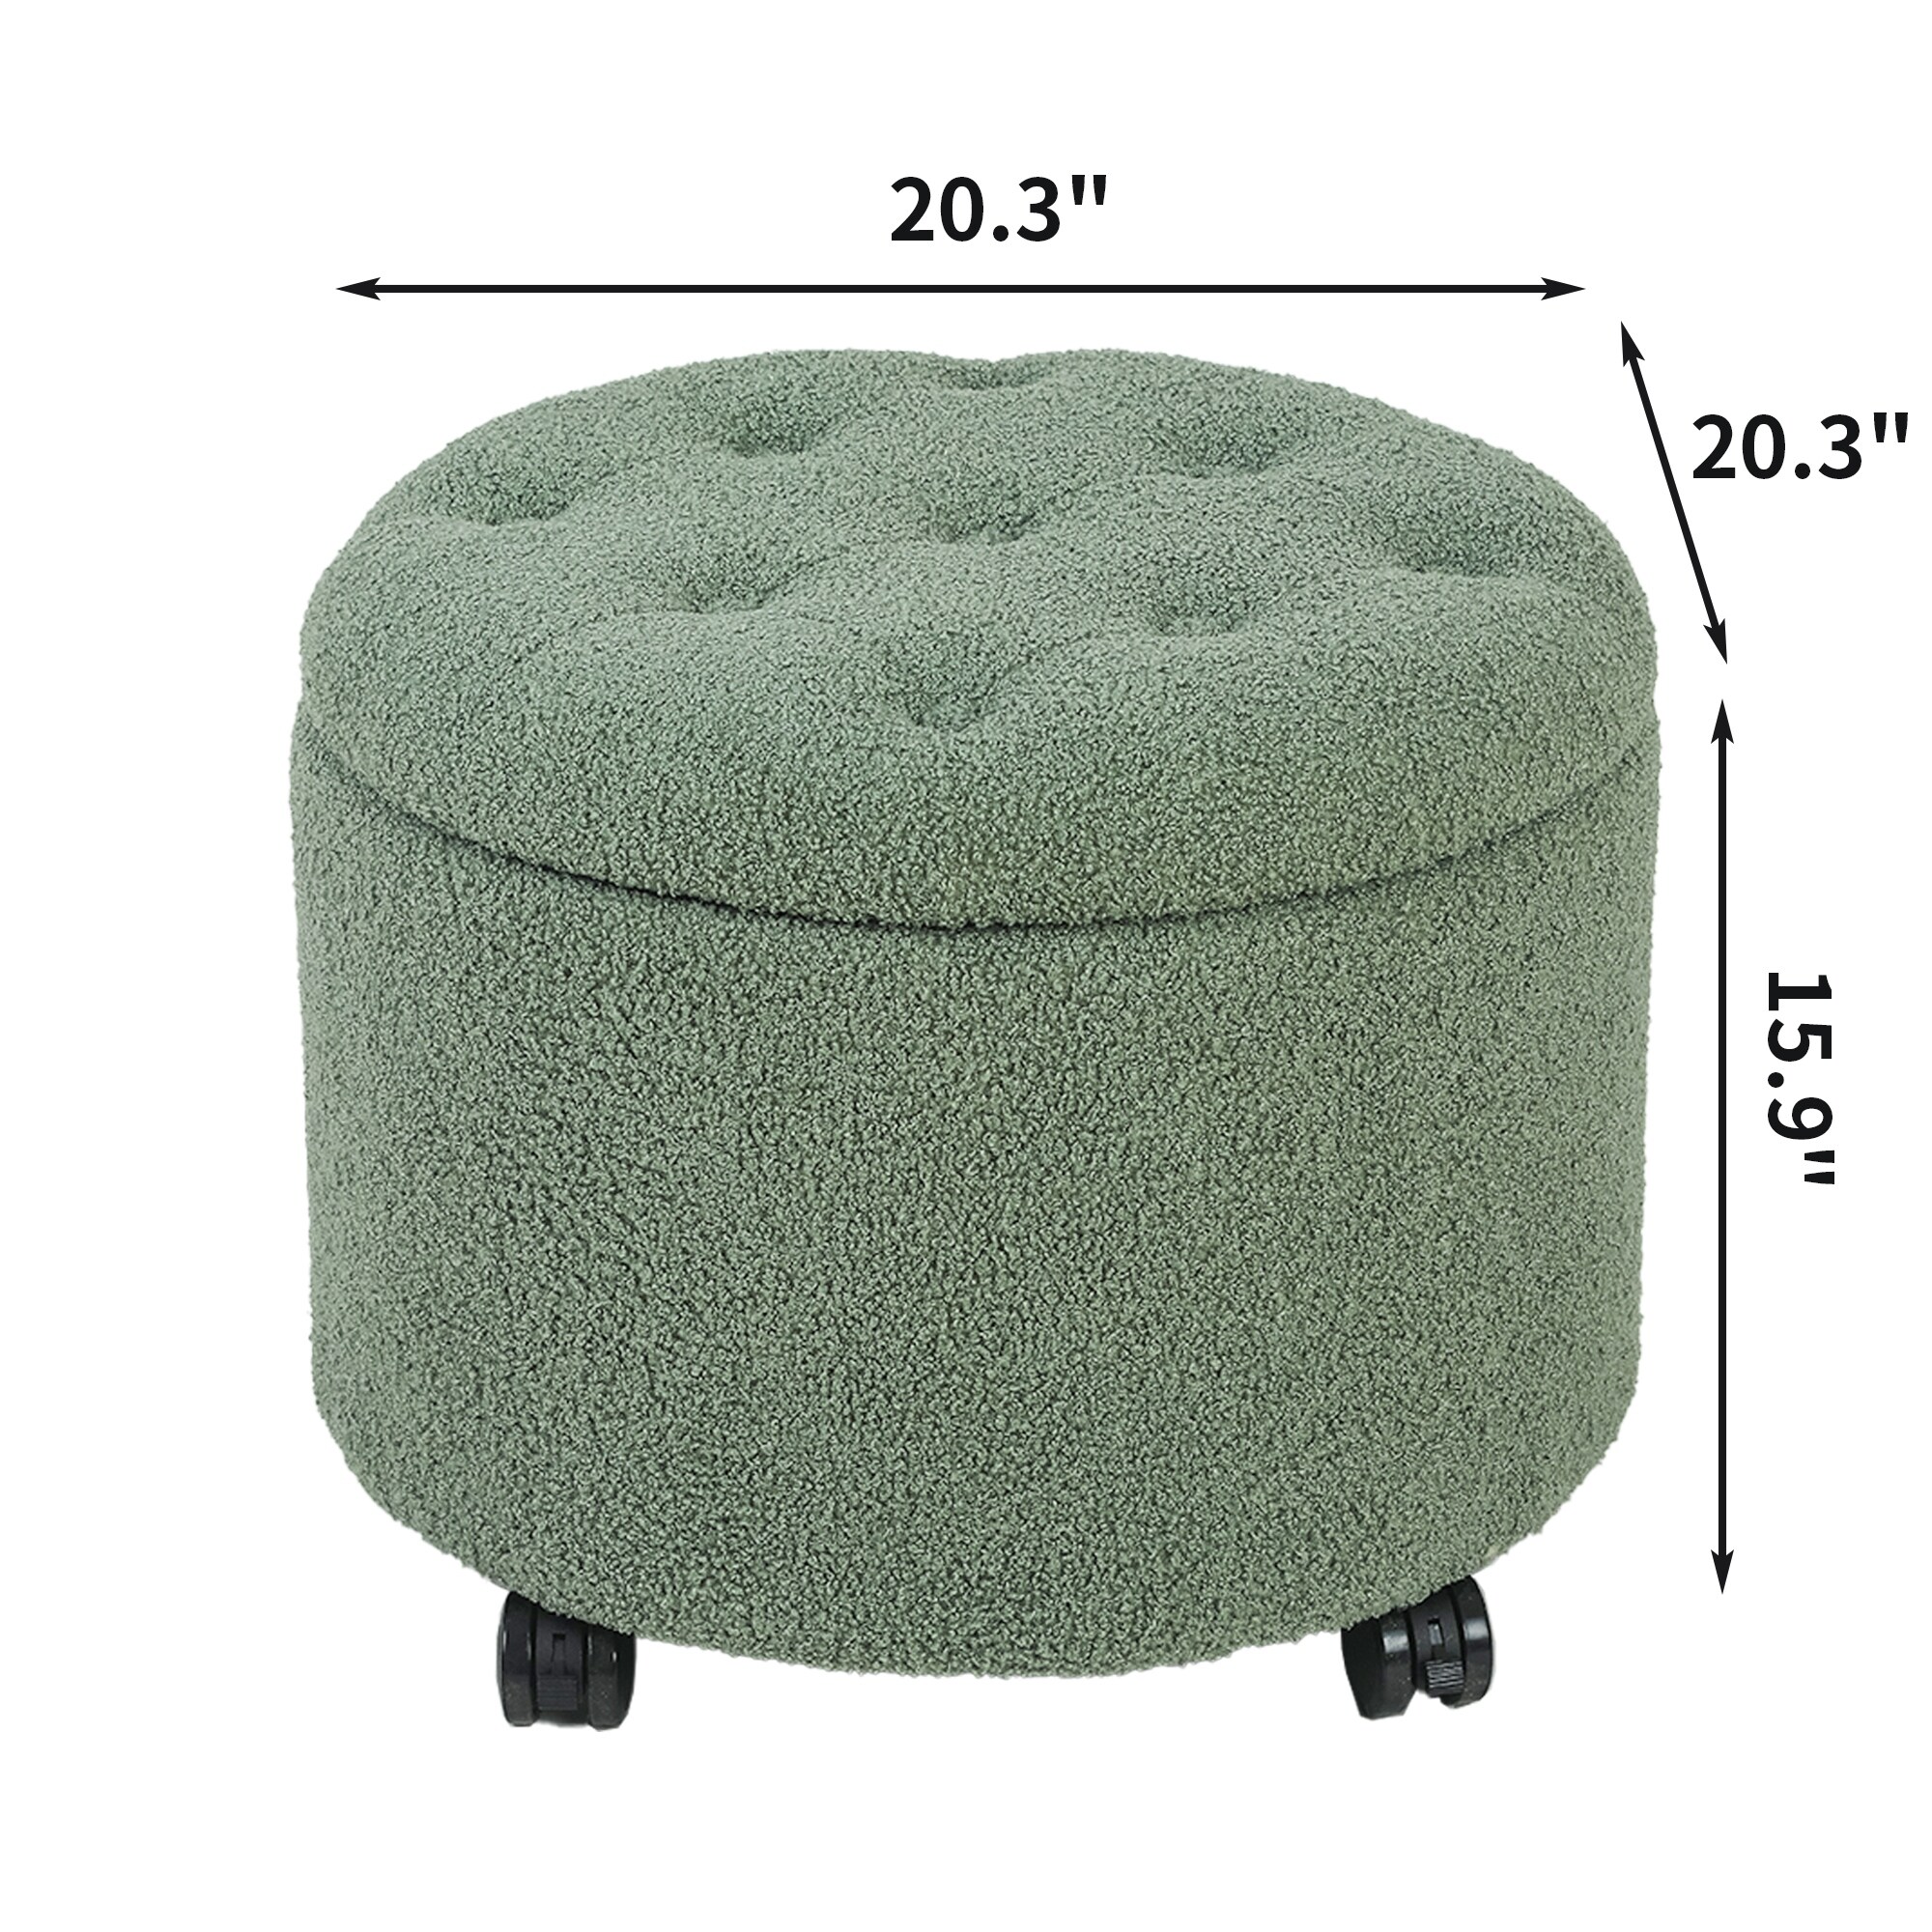 https://ak1.ostkcdn.com/images/products/is/images/direct/59d8936c918d7e75b974e38c0d52482cae49f19b/Adeco-20%22-Wide-Button-Tufted-Round-Storage-Ottoman-with-Casters.jpg